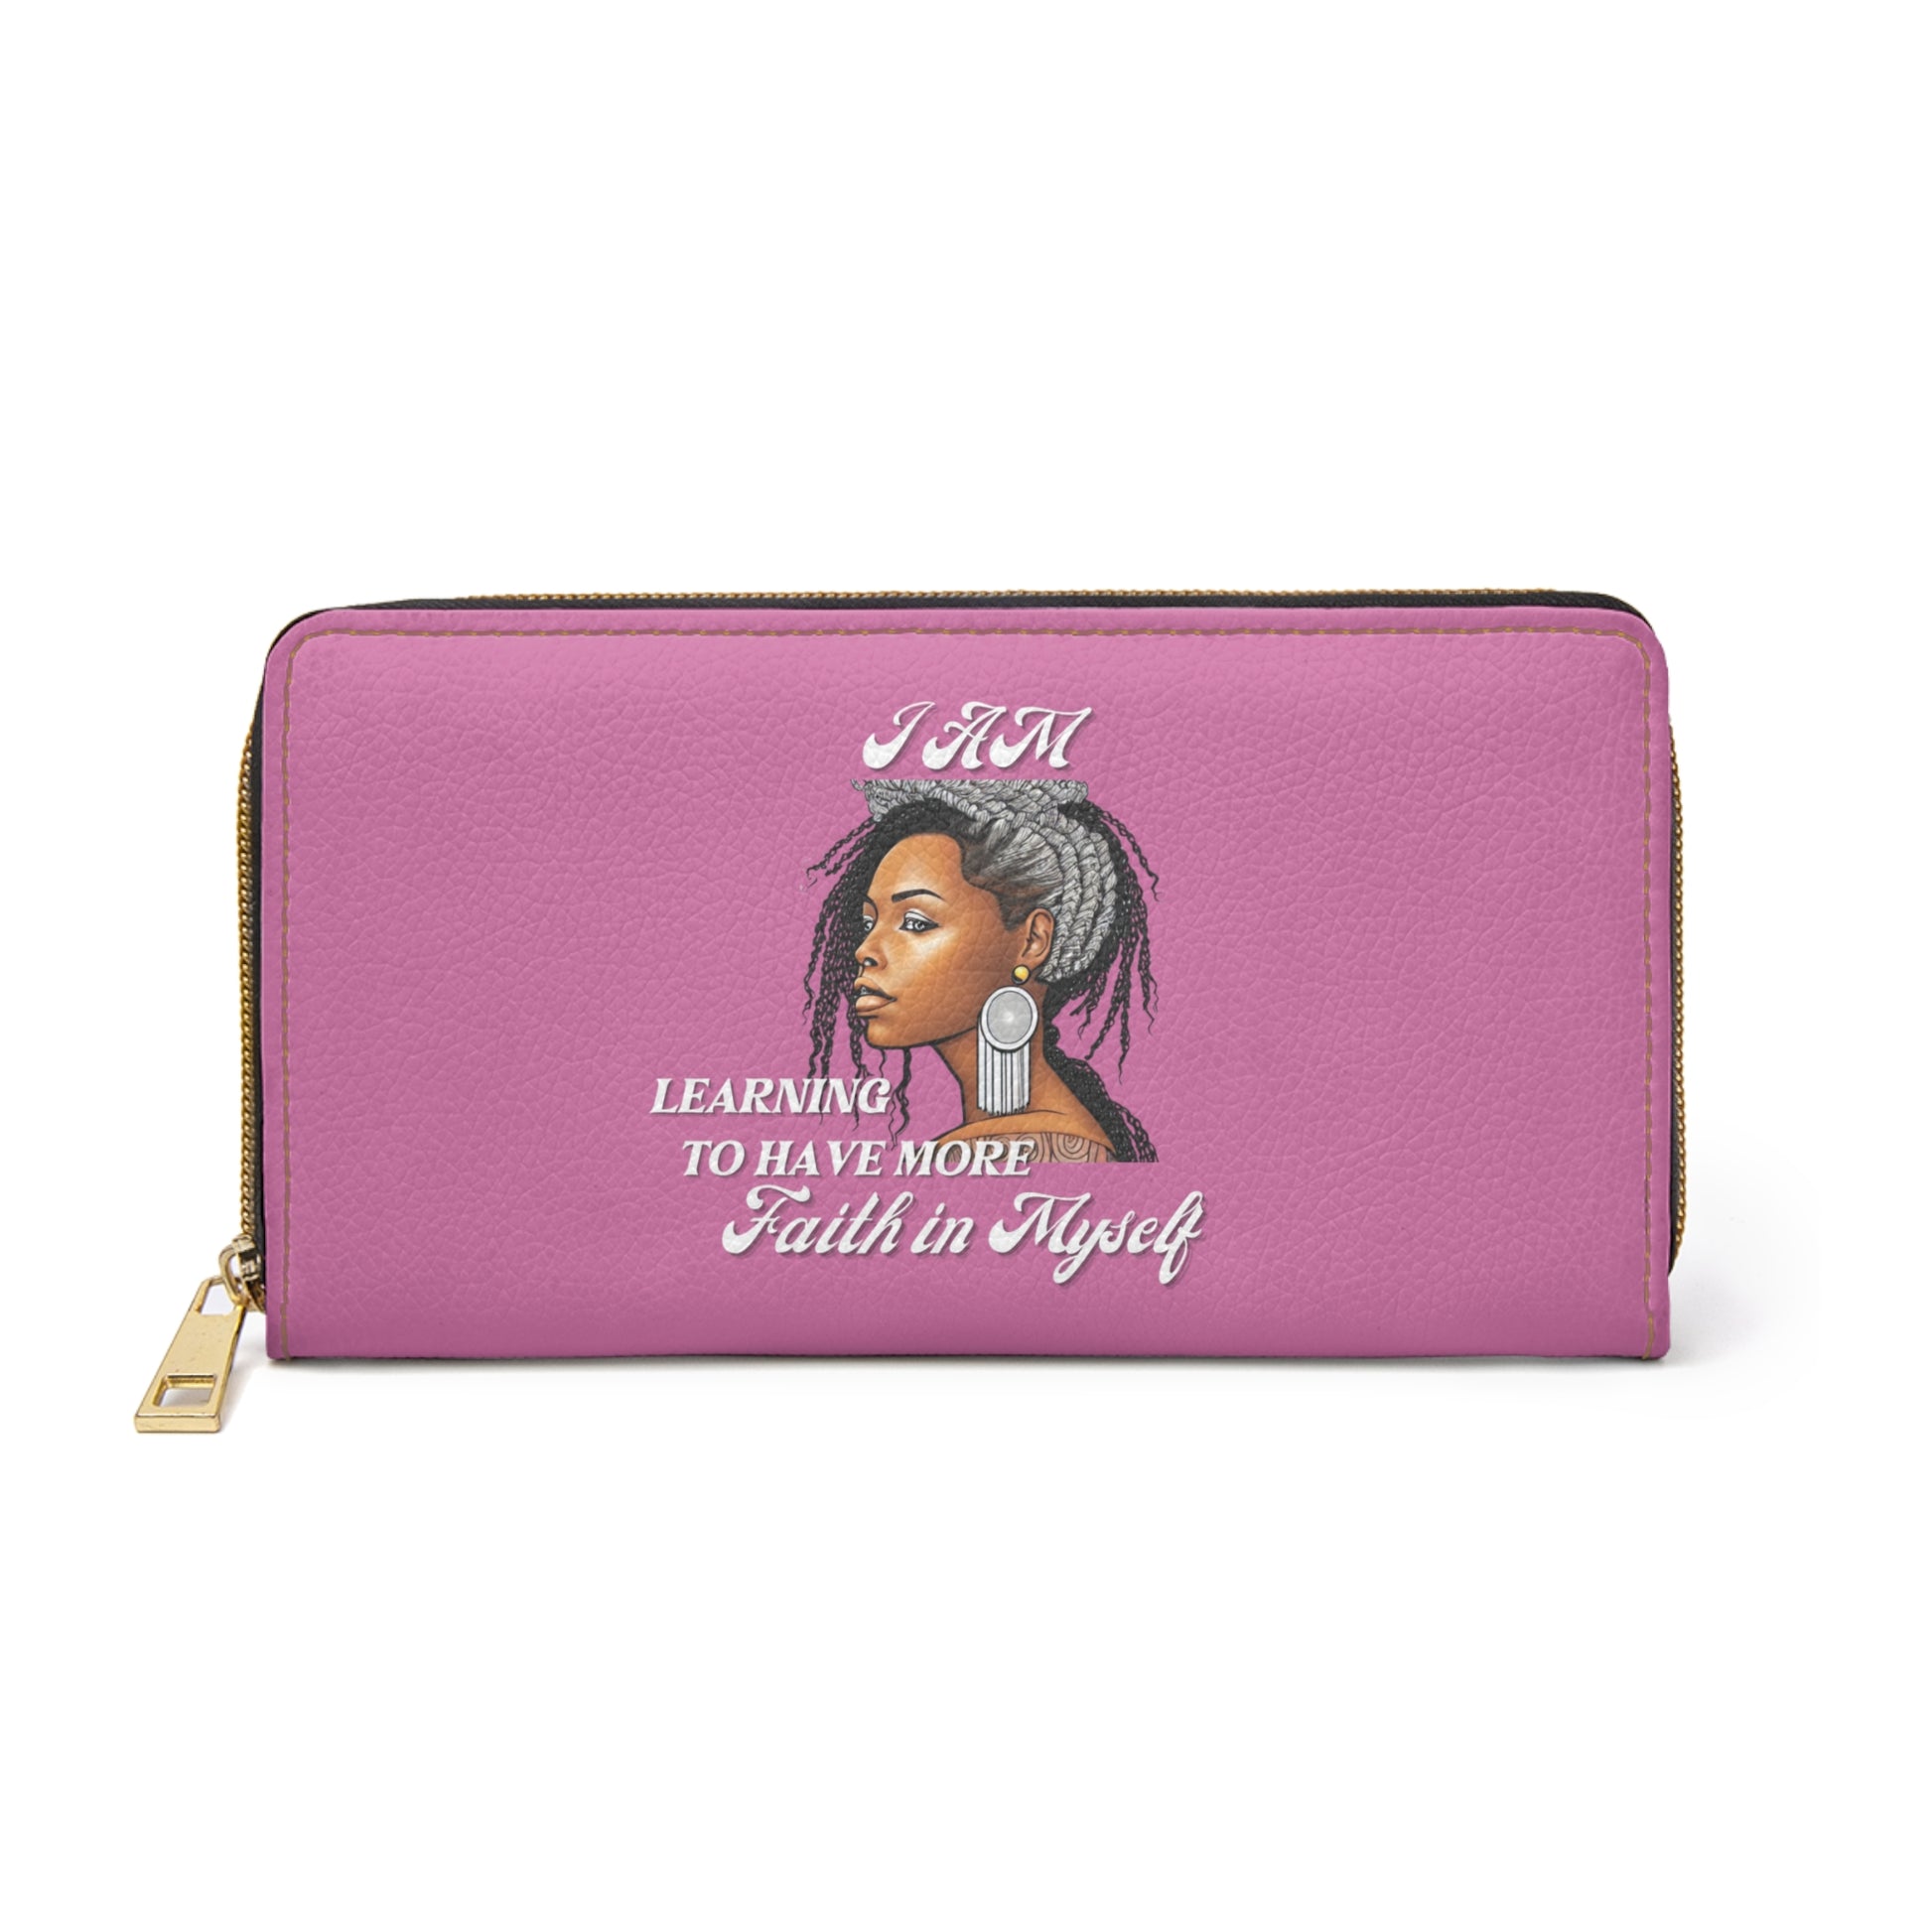 " Faith In Myself" -Positive Afrocentric Affirmation Vegan Leather Wallet Bag- Empower Your Style and Self-Love; Pink Wallet